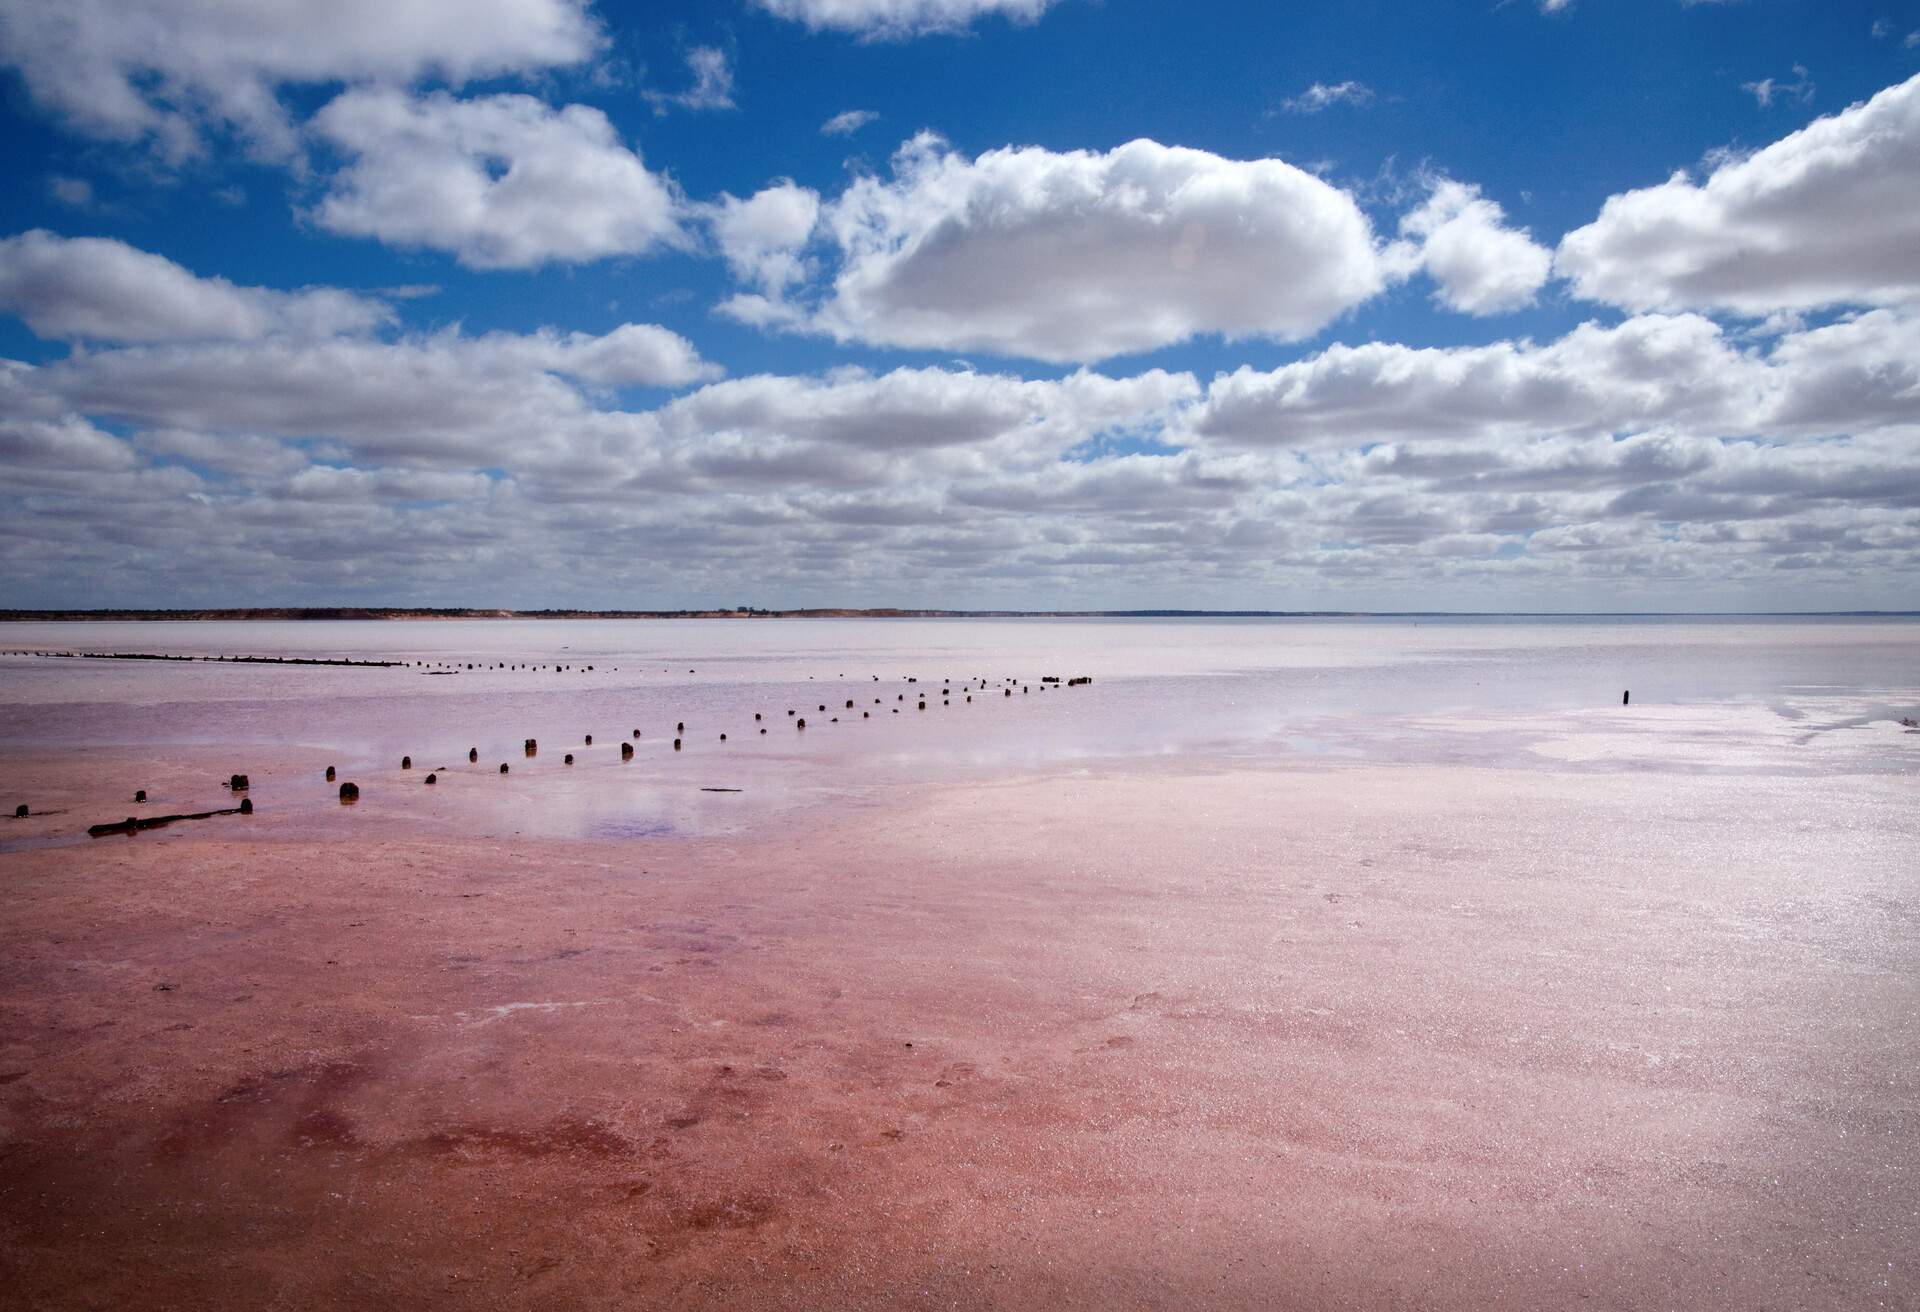 Lake Hart, a salt lake in Outback South Australia popular with adventure travellers and outback tourists.